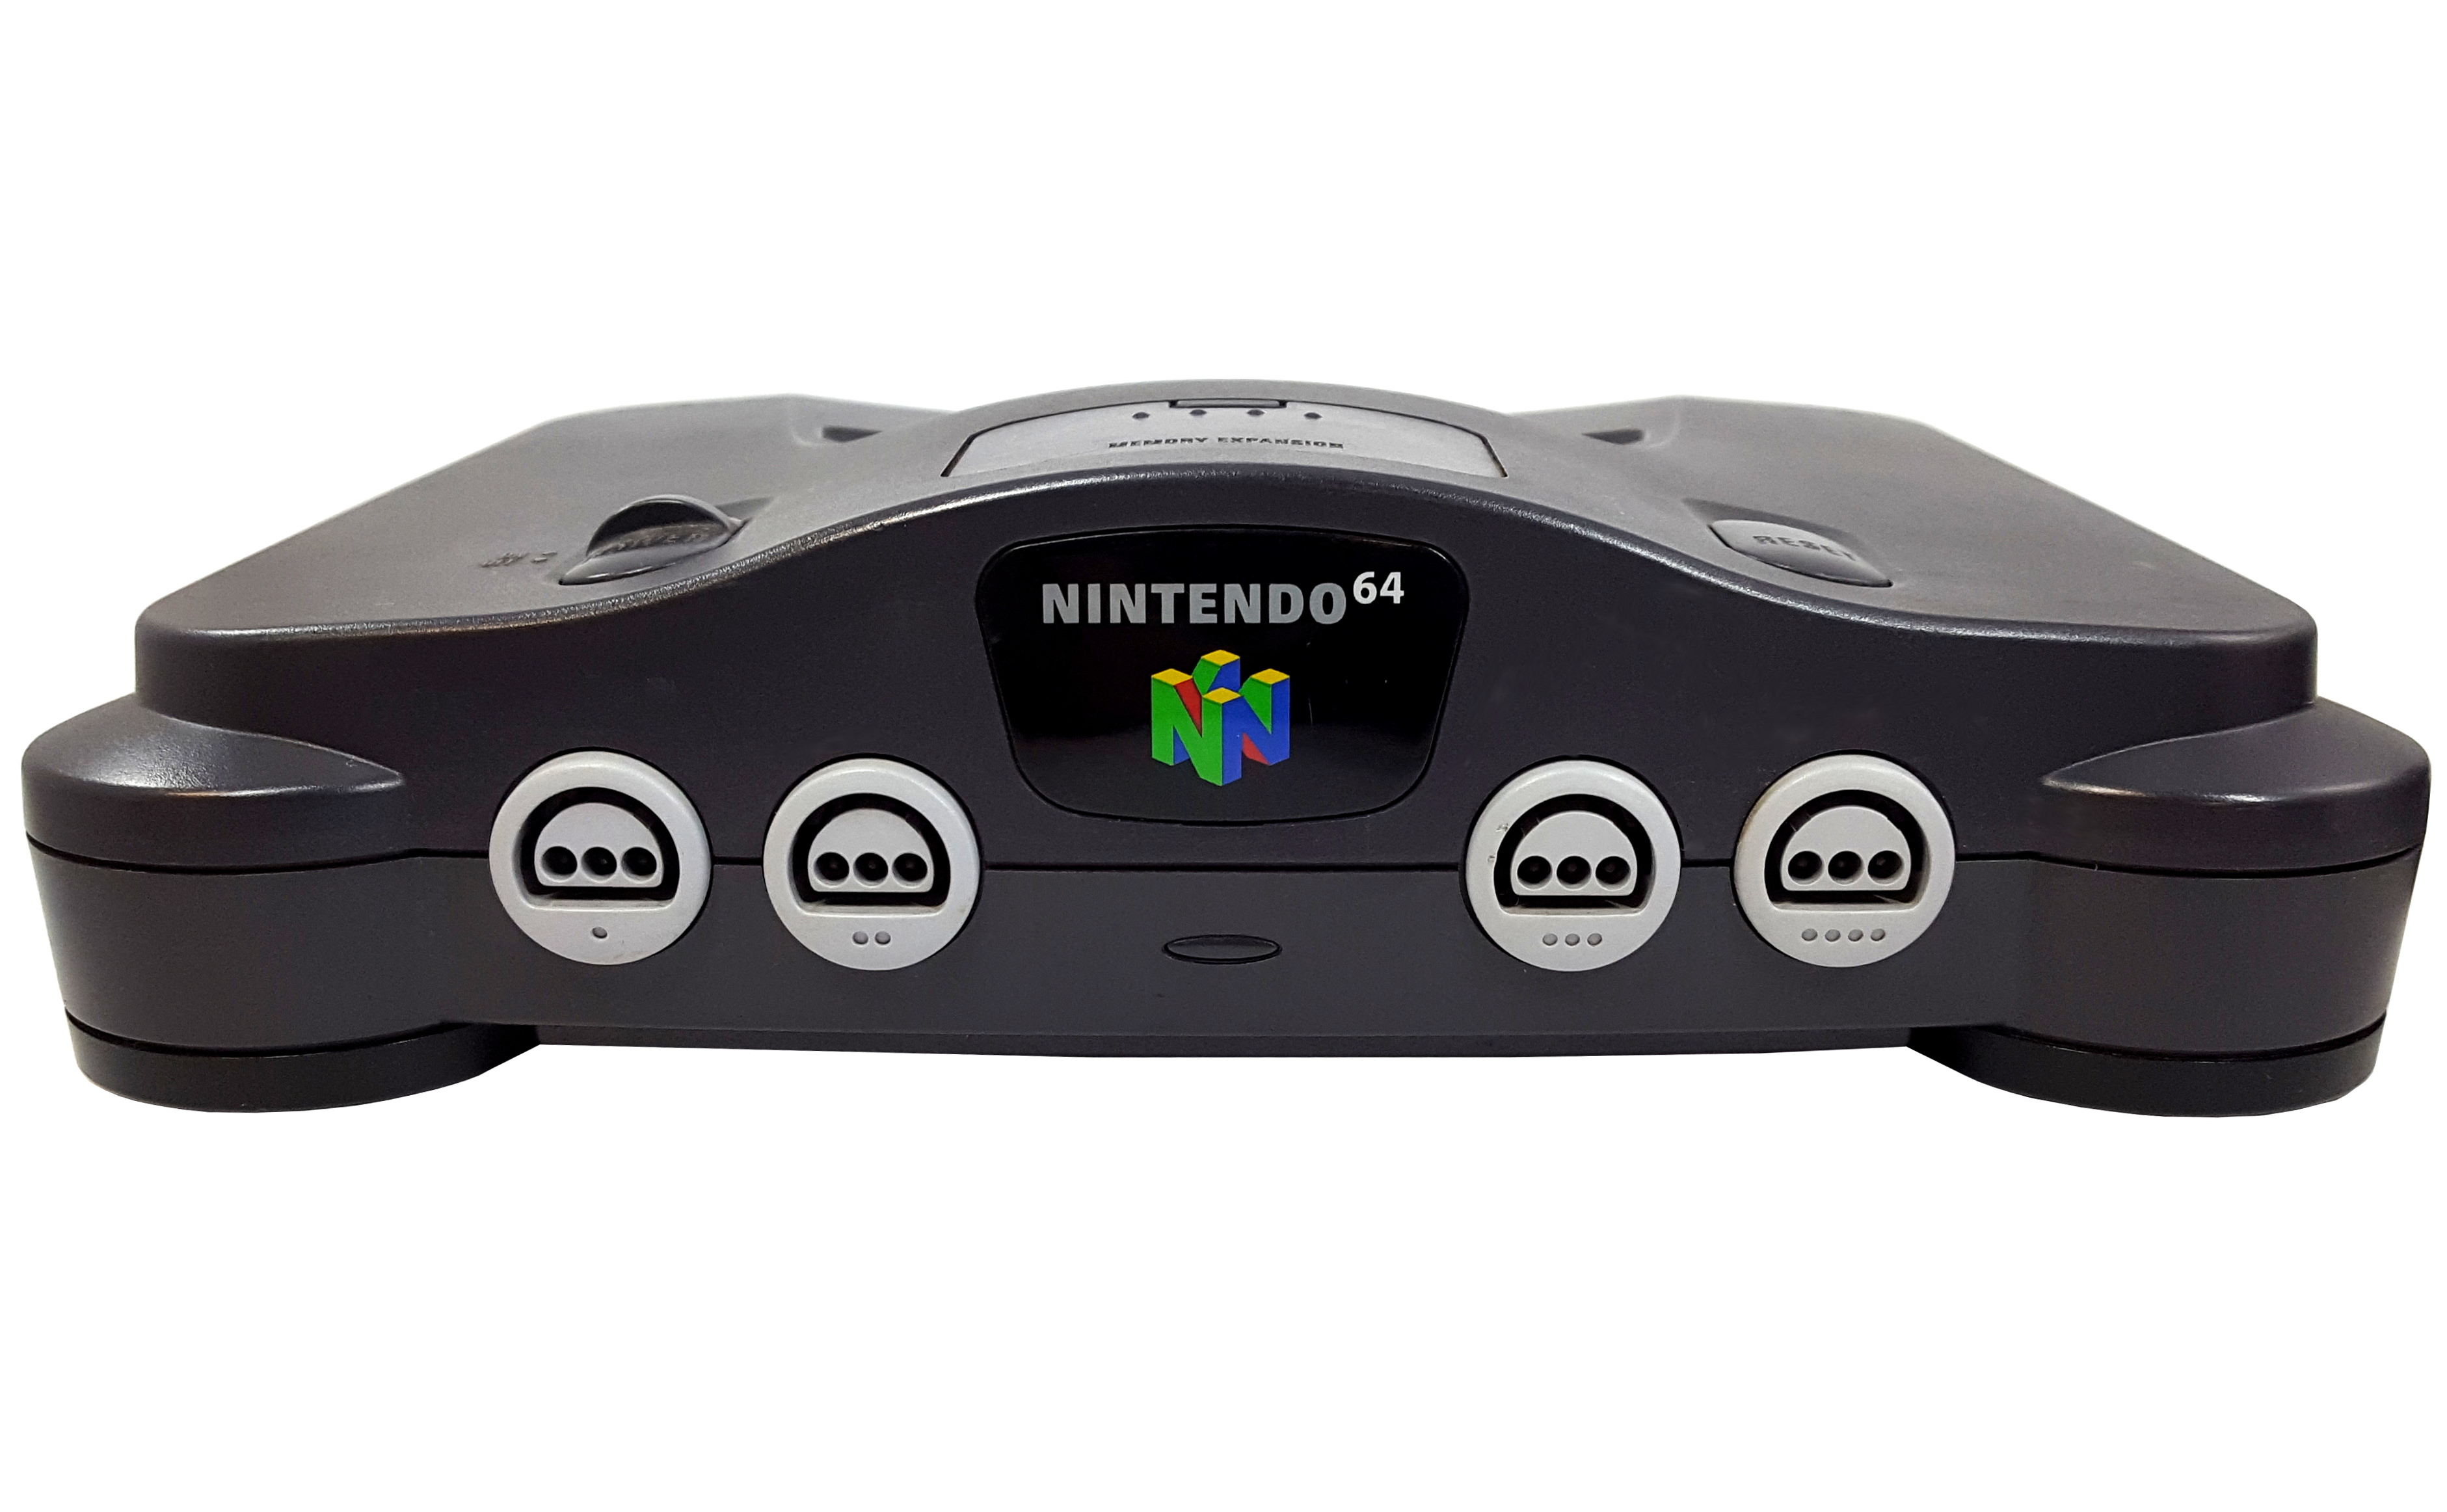 Restored Nintendo 64 Video Game Console with Controller and Cables (Refurbished) - image 2 of 4